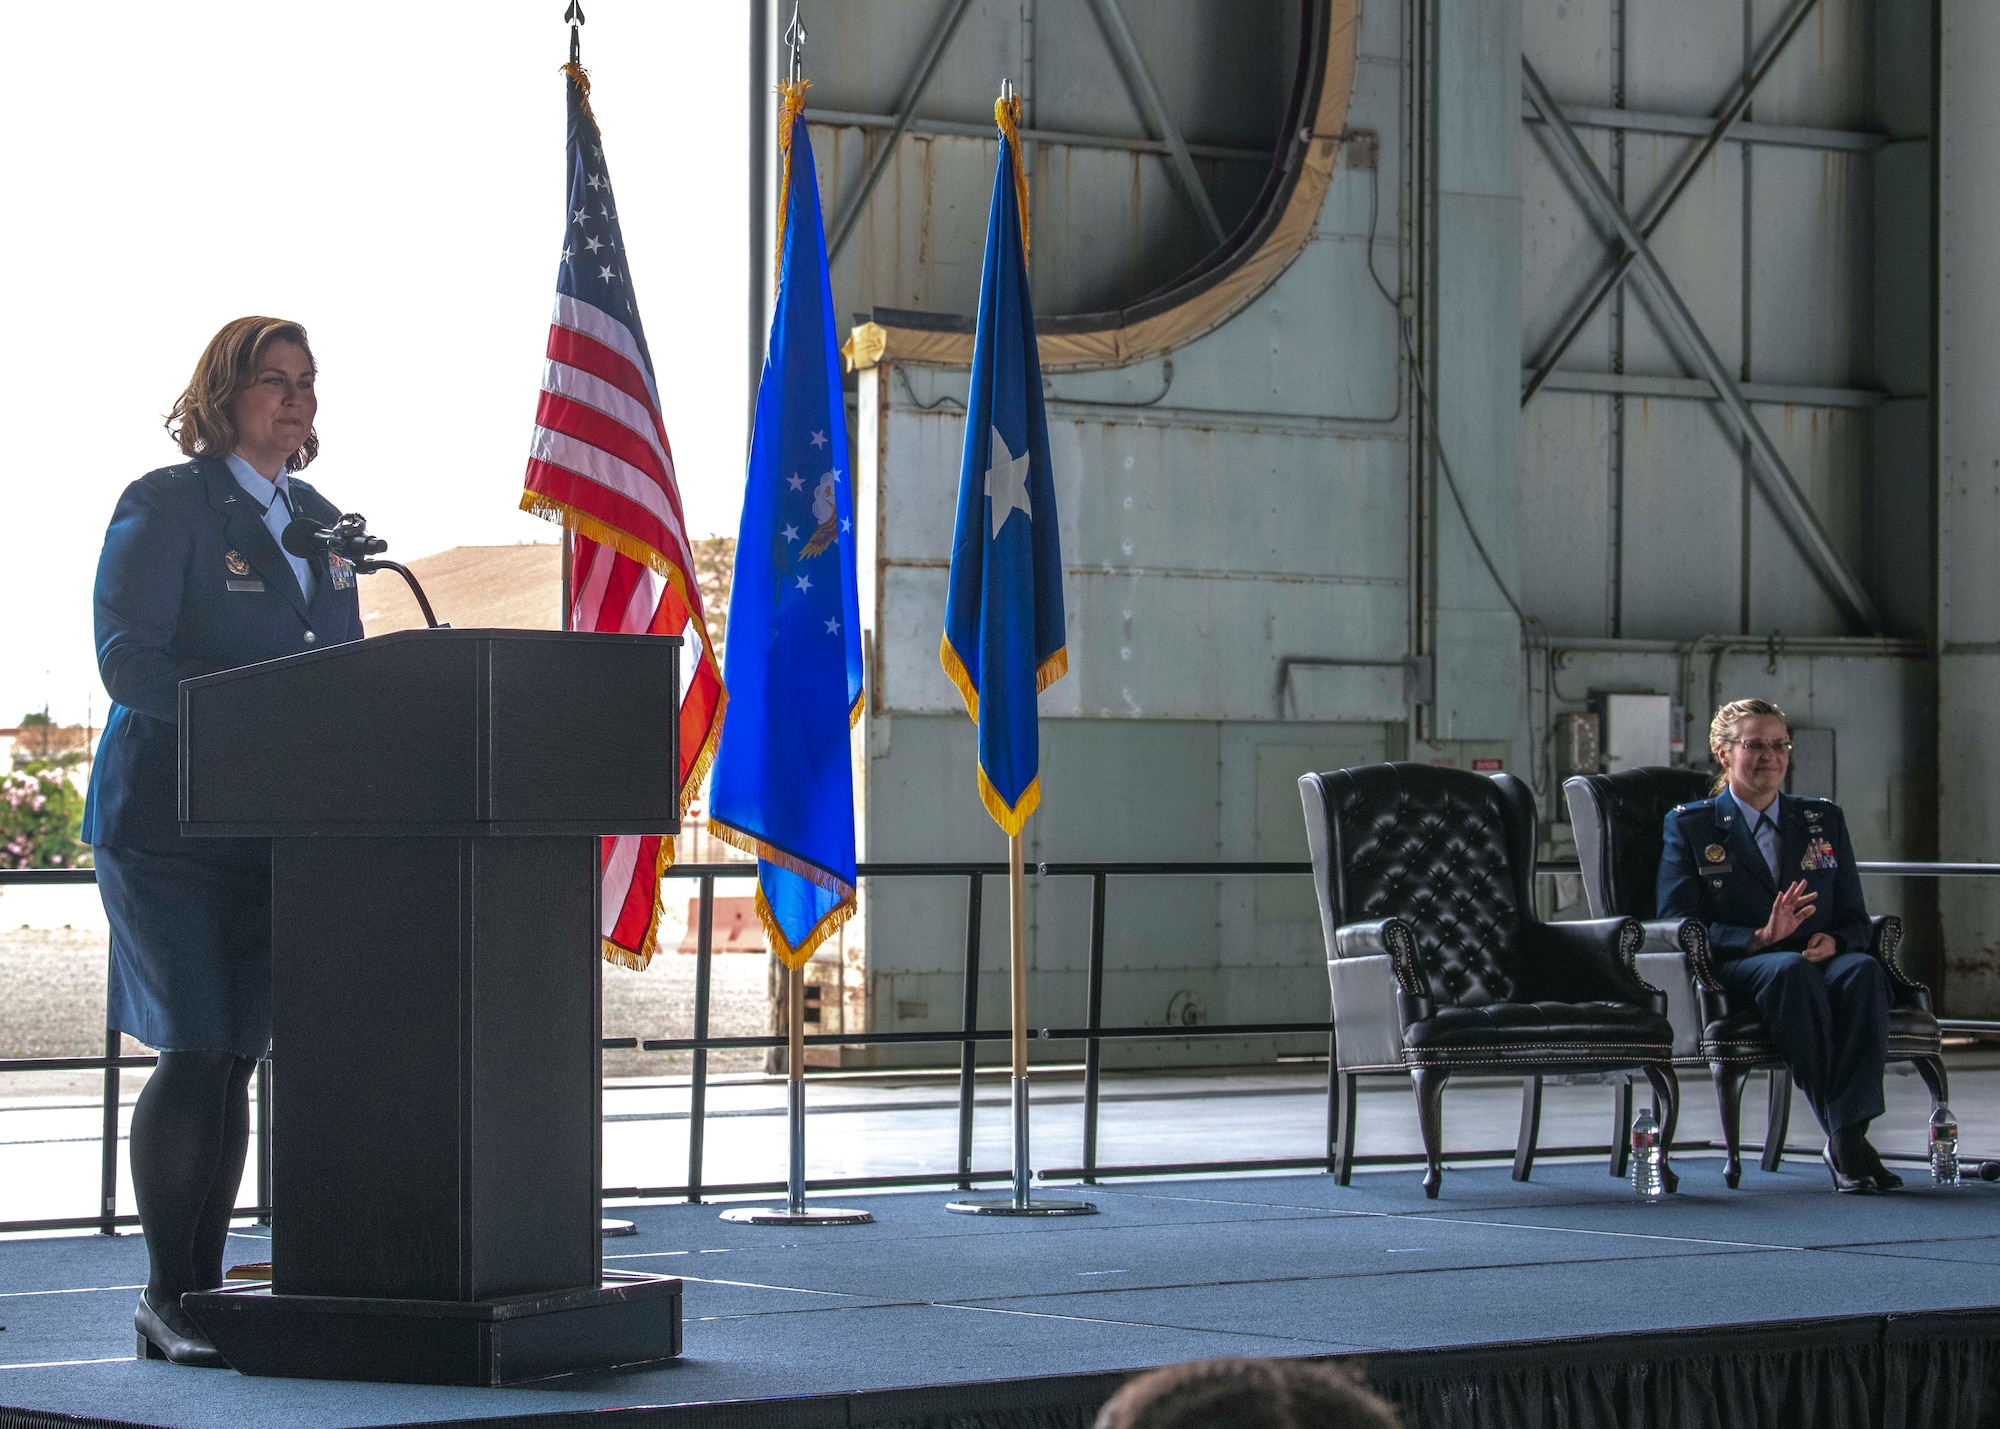 Brig. Gen. Michele Kilgore, military deputy director, USAF HAF, Pentagon, Washington, D.C., delivers remarks at the retirement ceremony for Col. Jacquelyn Marty, 349th Air Mobility Wing vice commander, on June 4, 2022 at Travis AFB, Calif. Marty is retiring after a career spanning over three decades of service. Her flying career began in 1994 at Travis Air Force Base, and came full circle as a senior leader for more than 2,600 Reserve Citizen Airmen for the past two years. (U.S. Air Force photo by Master Sgt. Jose B. Aquilizan)